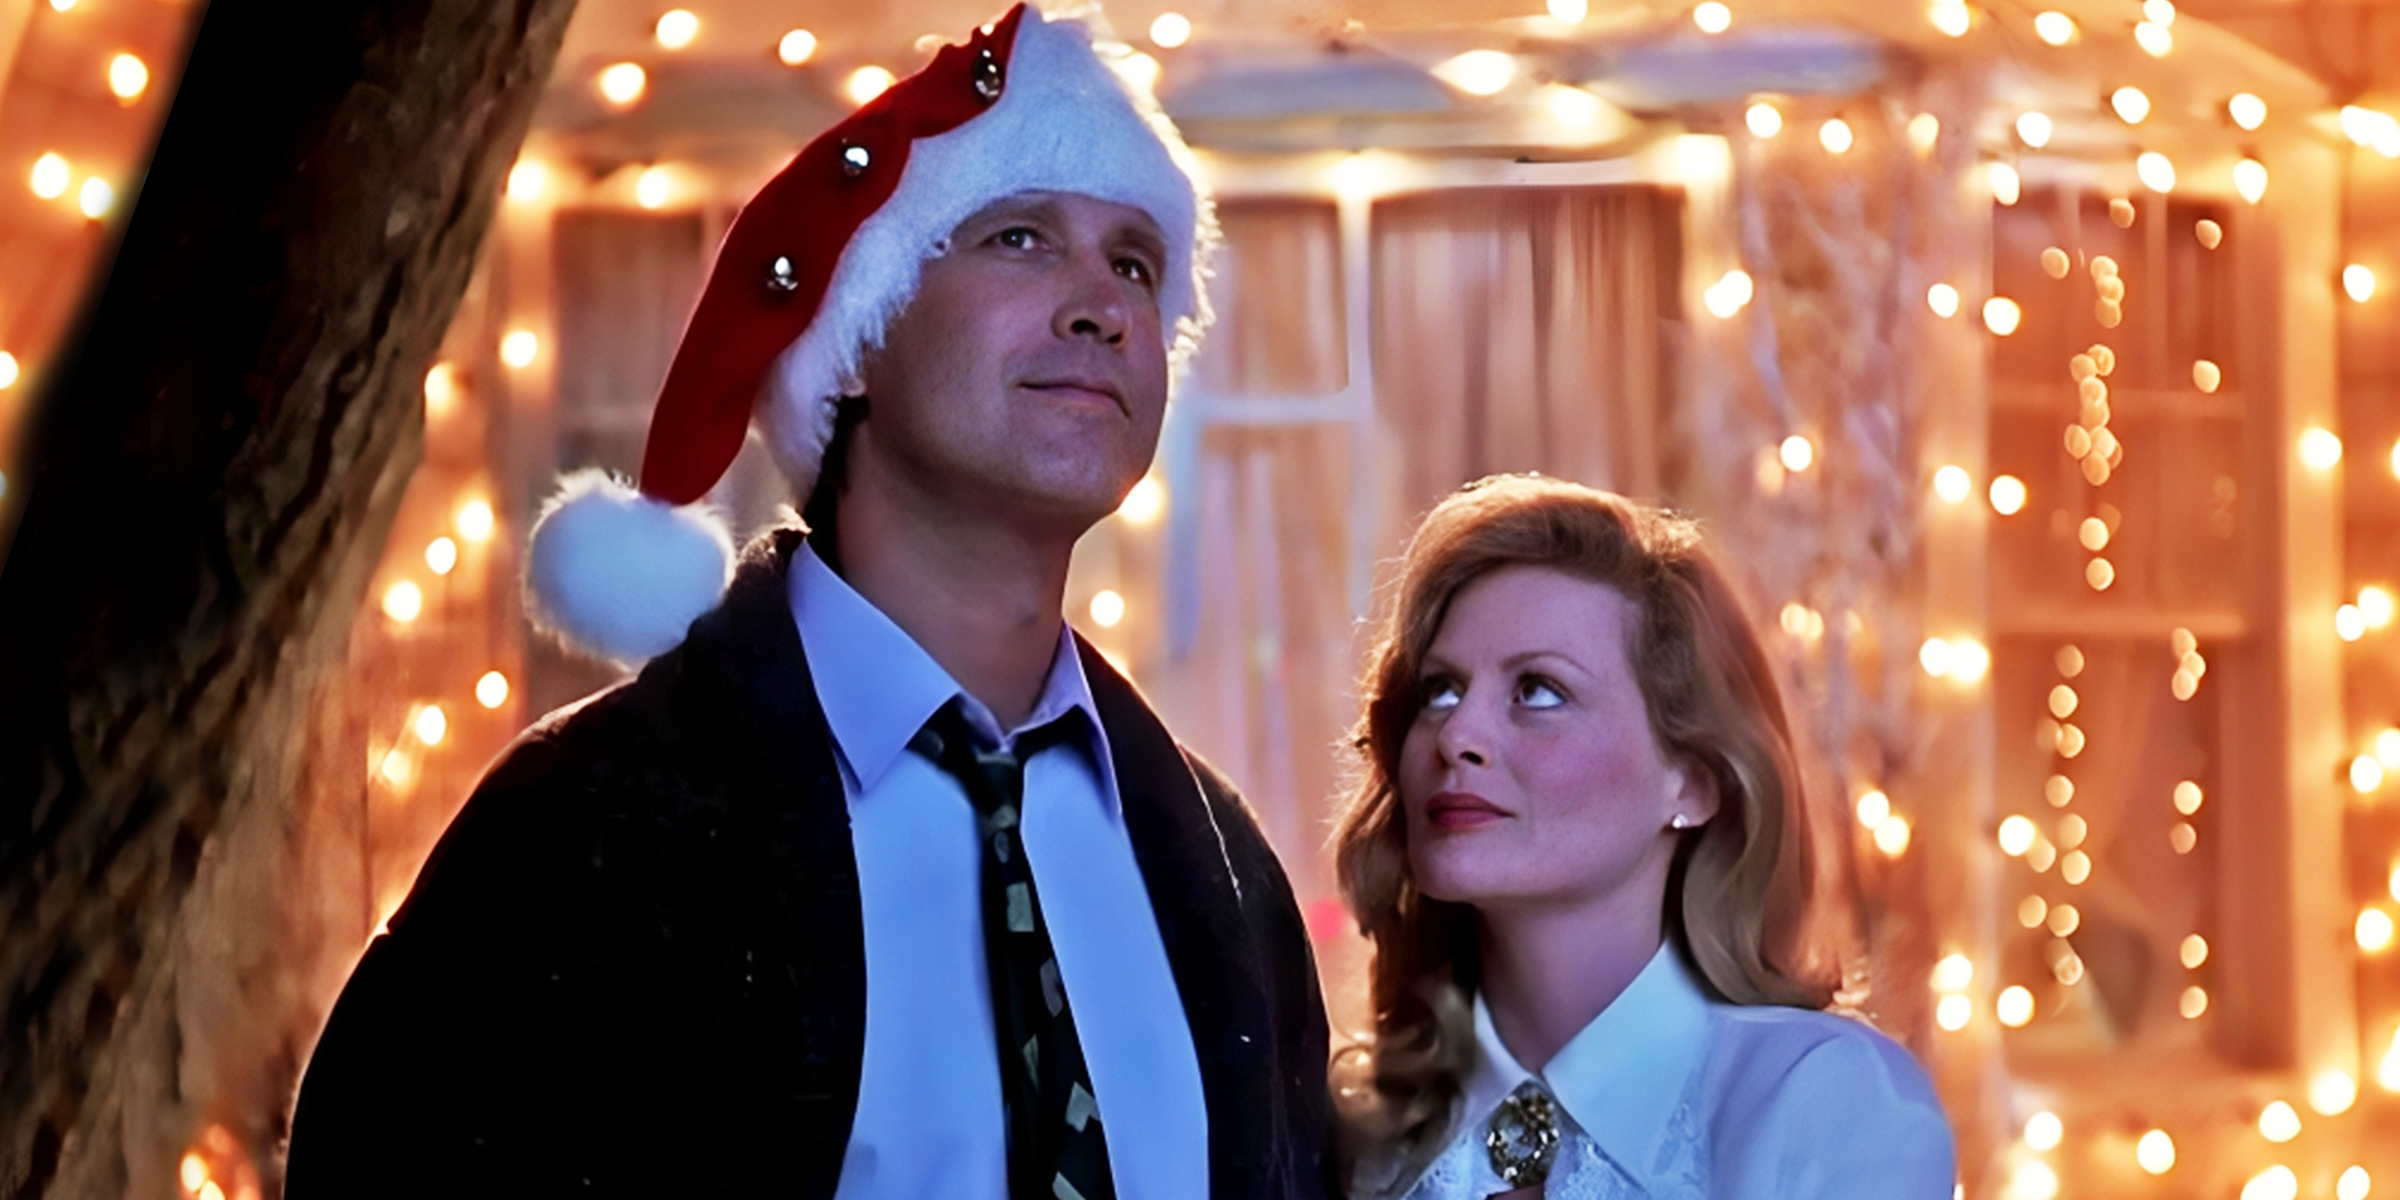 Chevy Chase and Beverly D'Angelo | Source: Warner Brothers